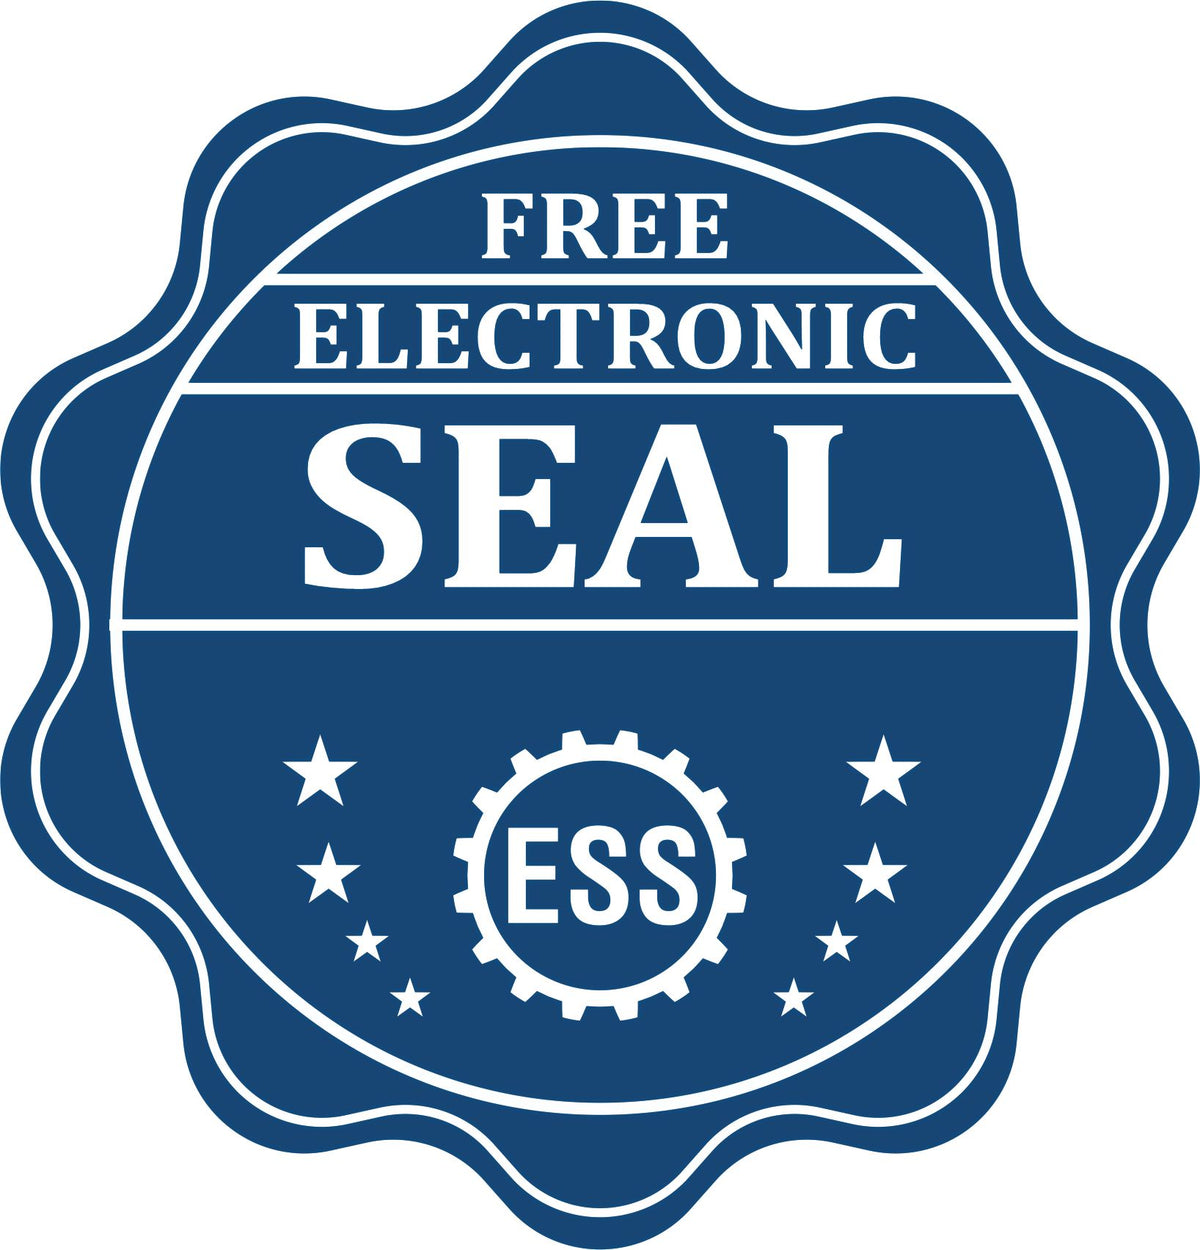 A badge showing a free electronic seal for the Long Reach Hawaii Land Surveyor Seal with stars and the ESS gear on the emblem.